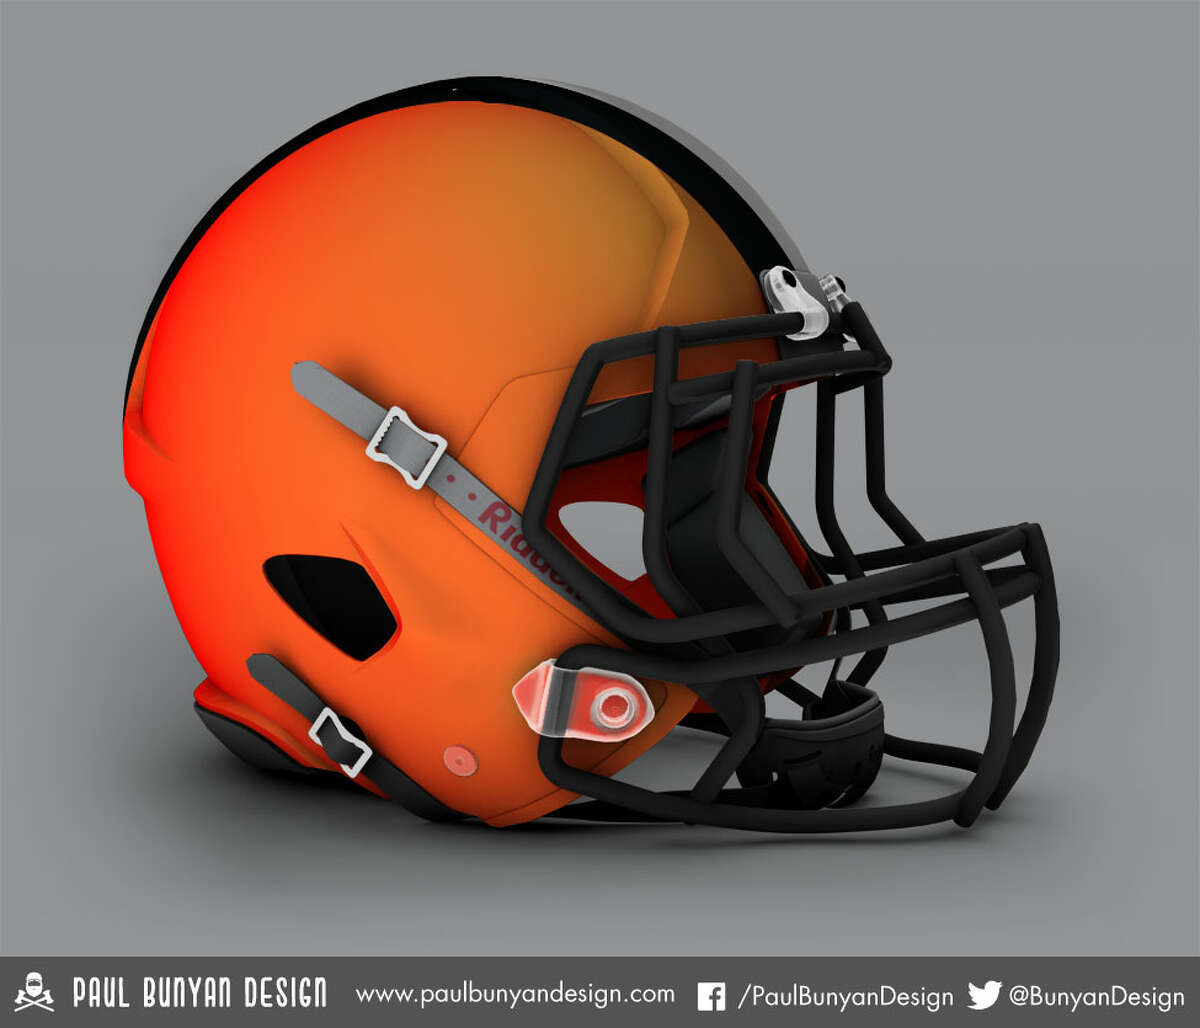 NFL concept helmets bring style back to the NFL